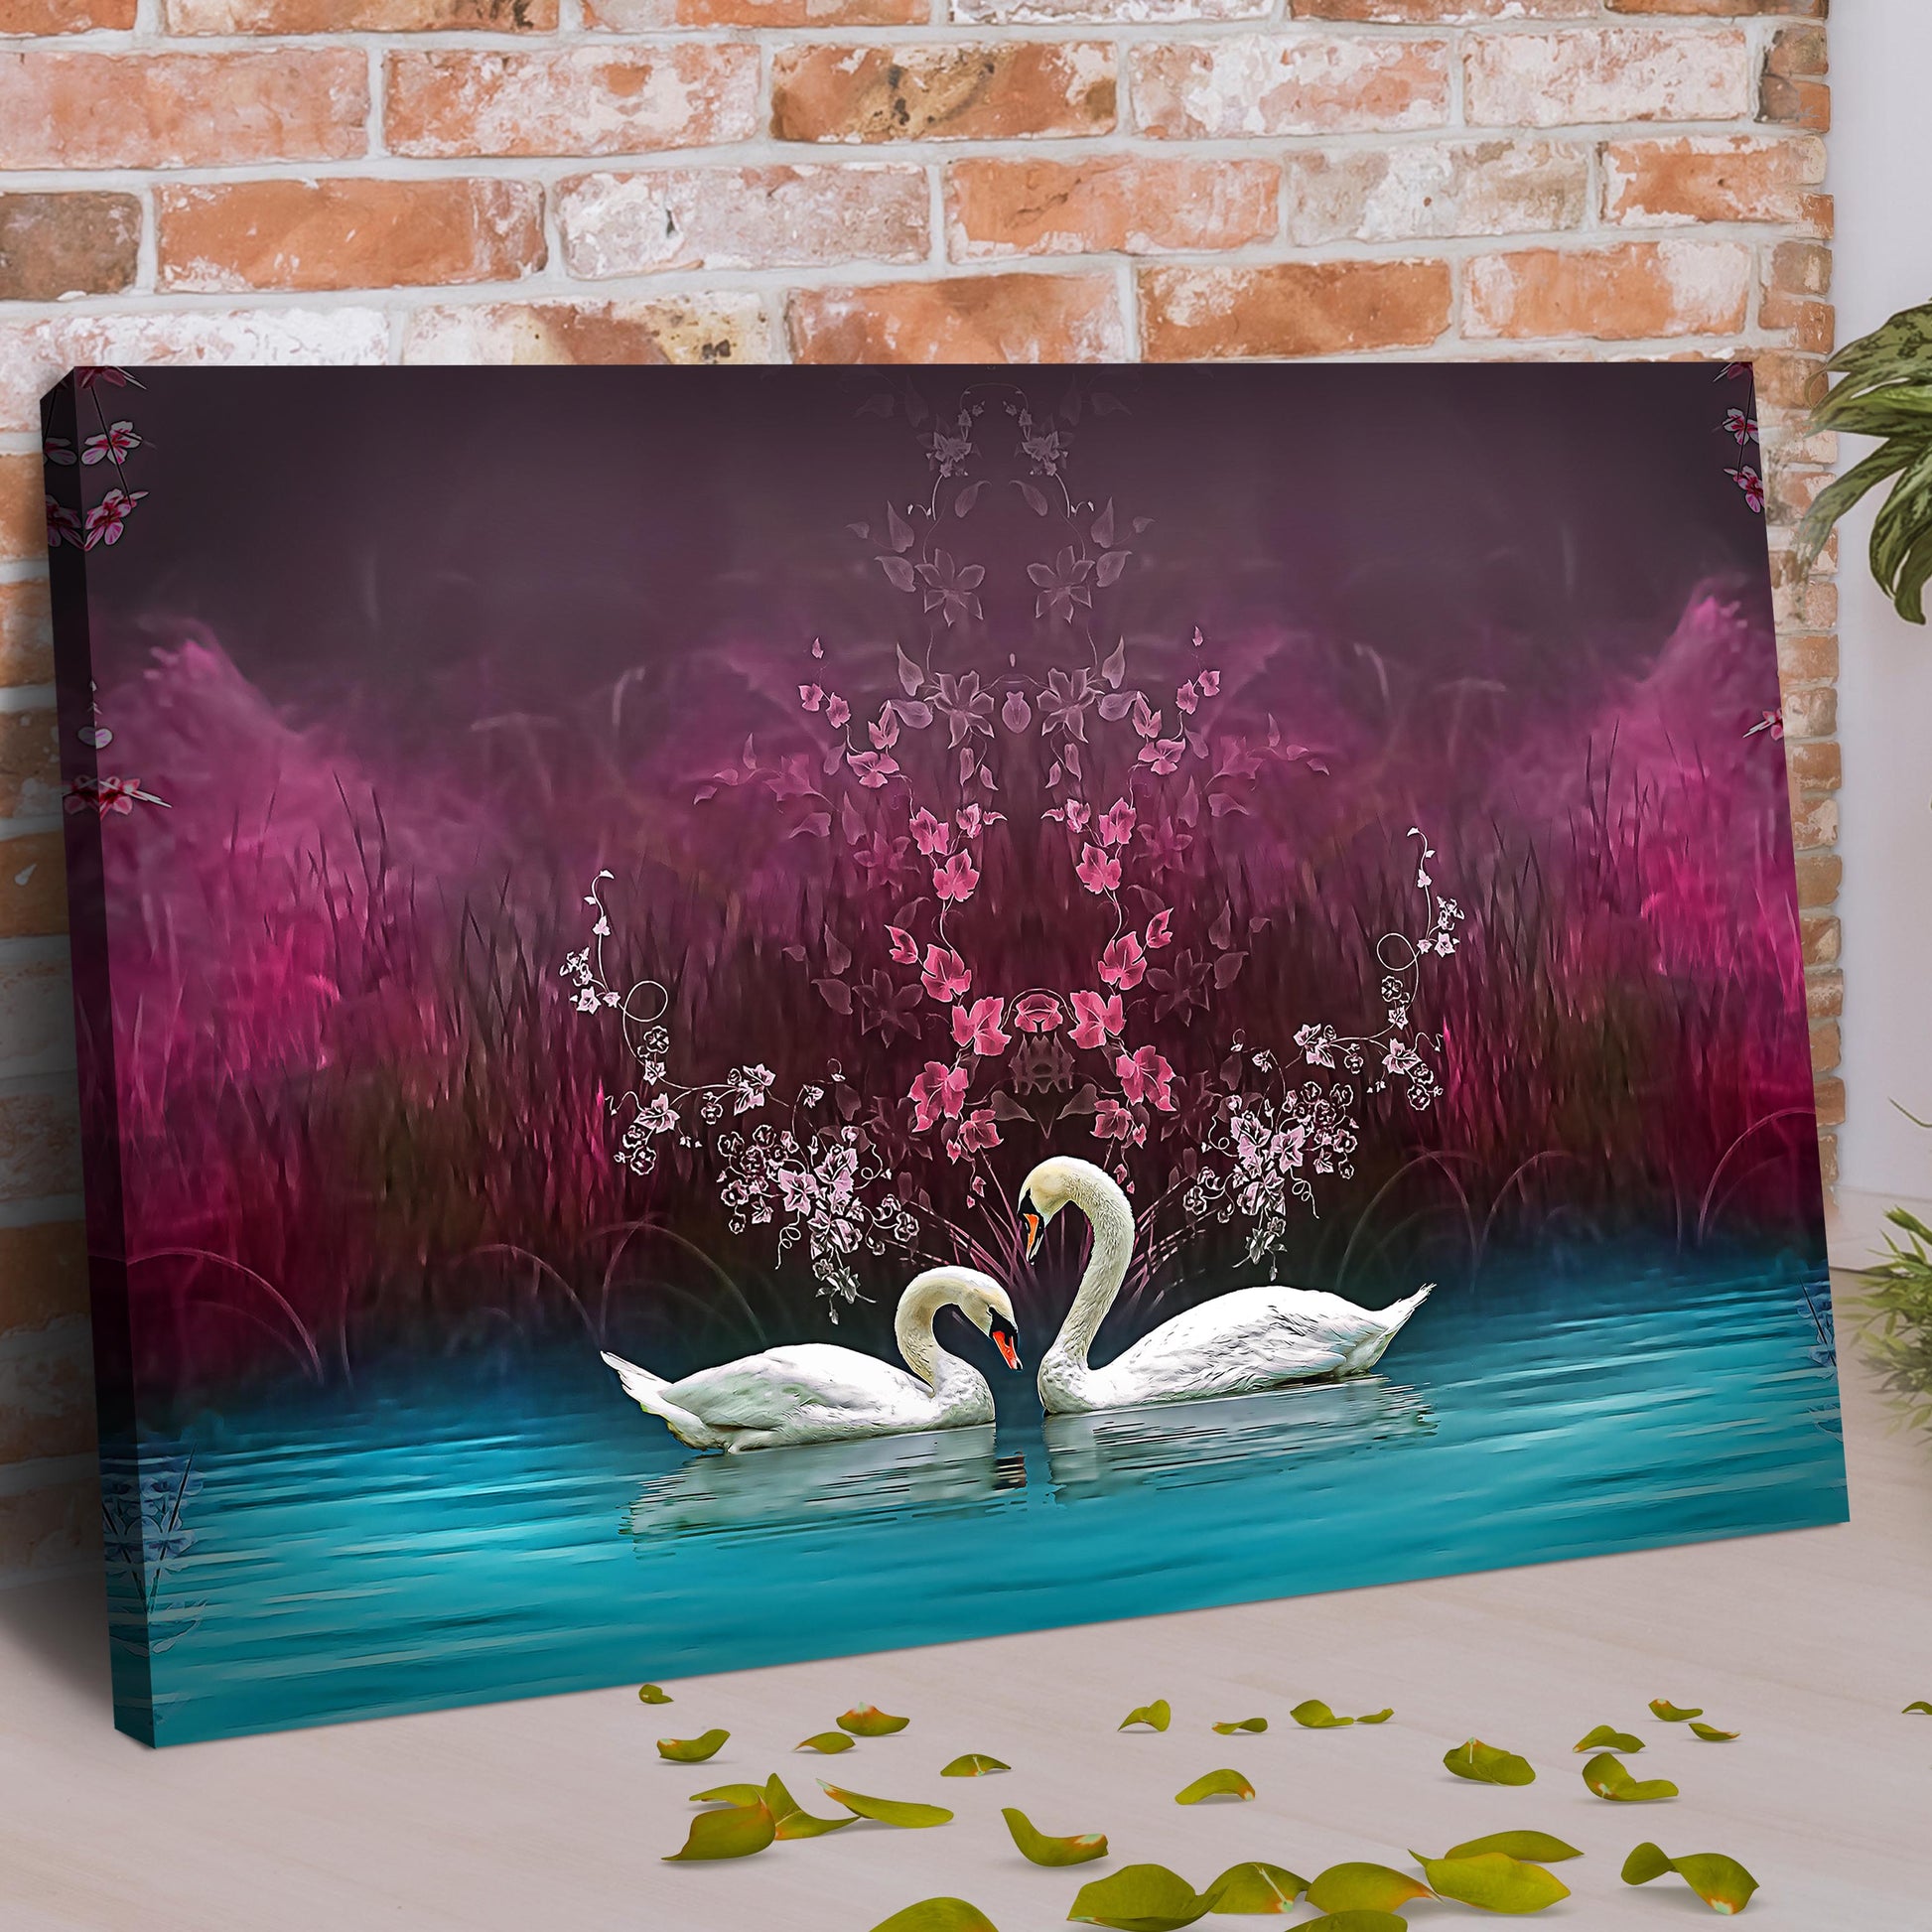 Beautiful Romantic Swans Canvas Wall Art Style 2 - Image by Tailored Canvases